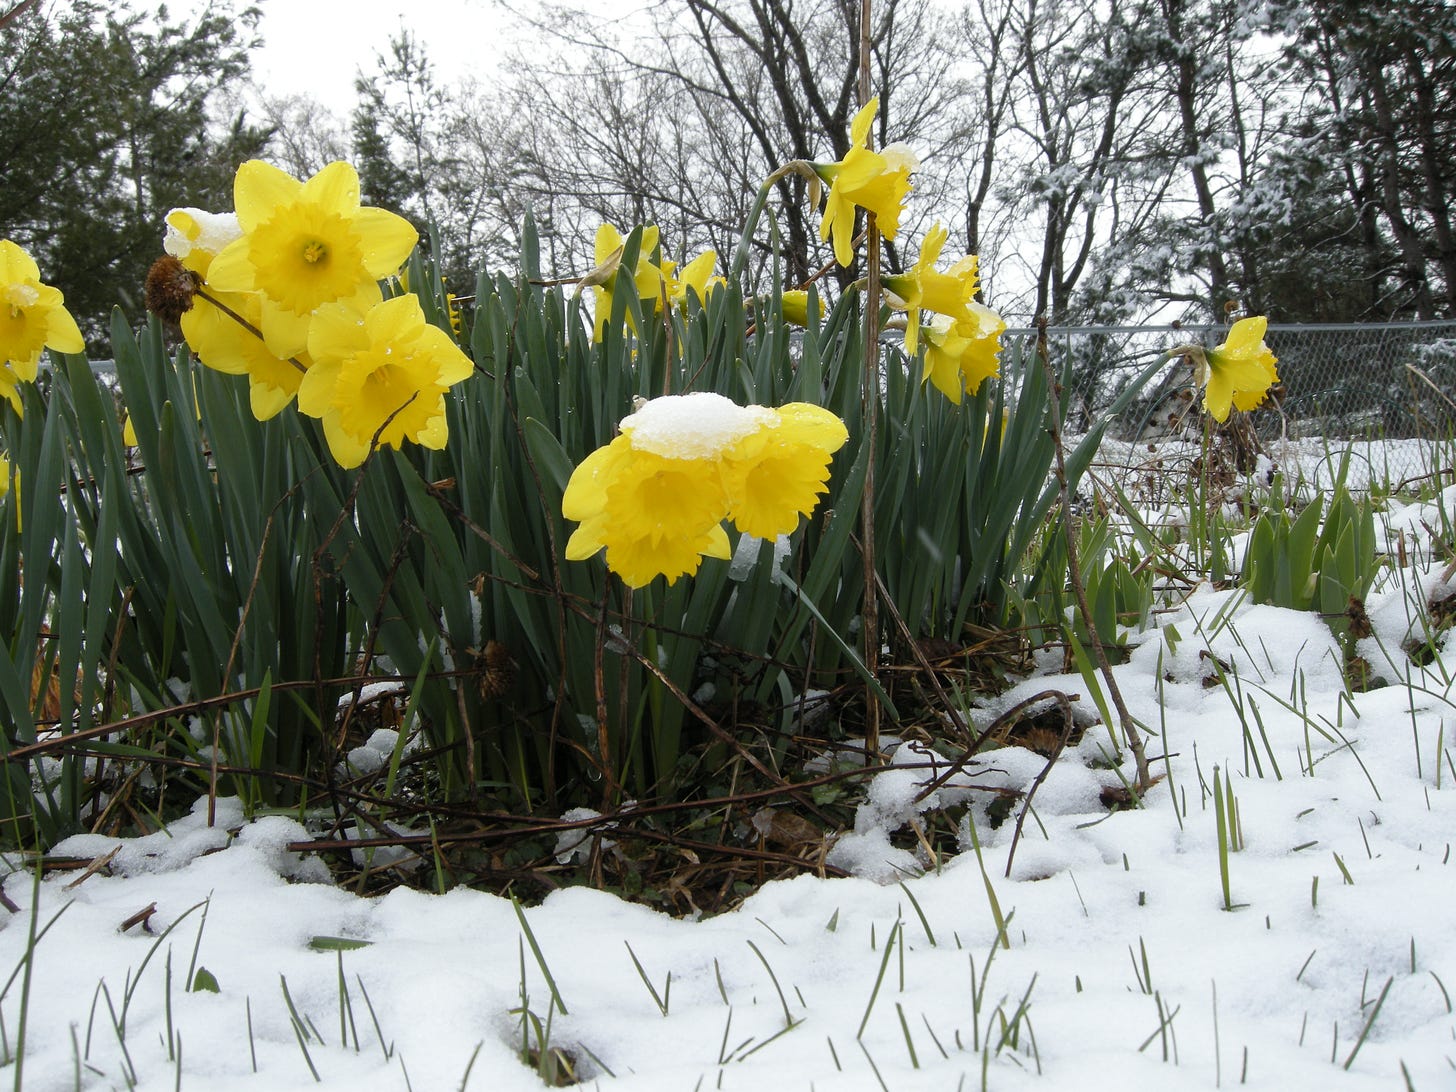 closeup of garden with daffodils weighed down by snow and surrounded by it, but still in full bloom.